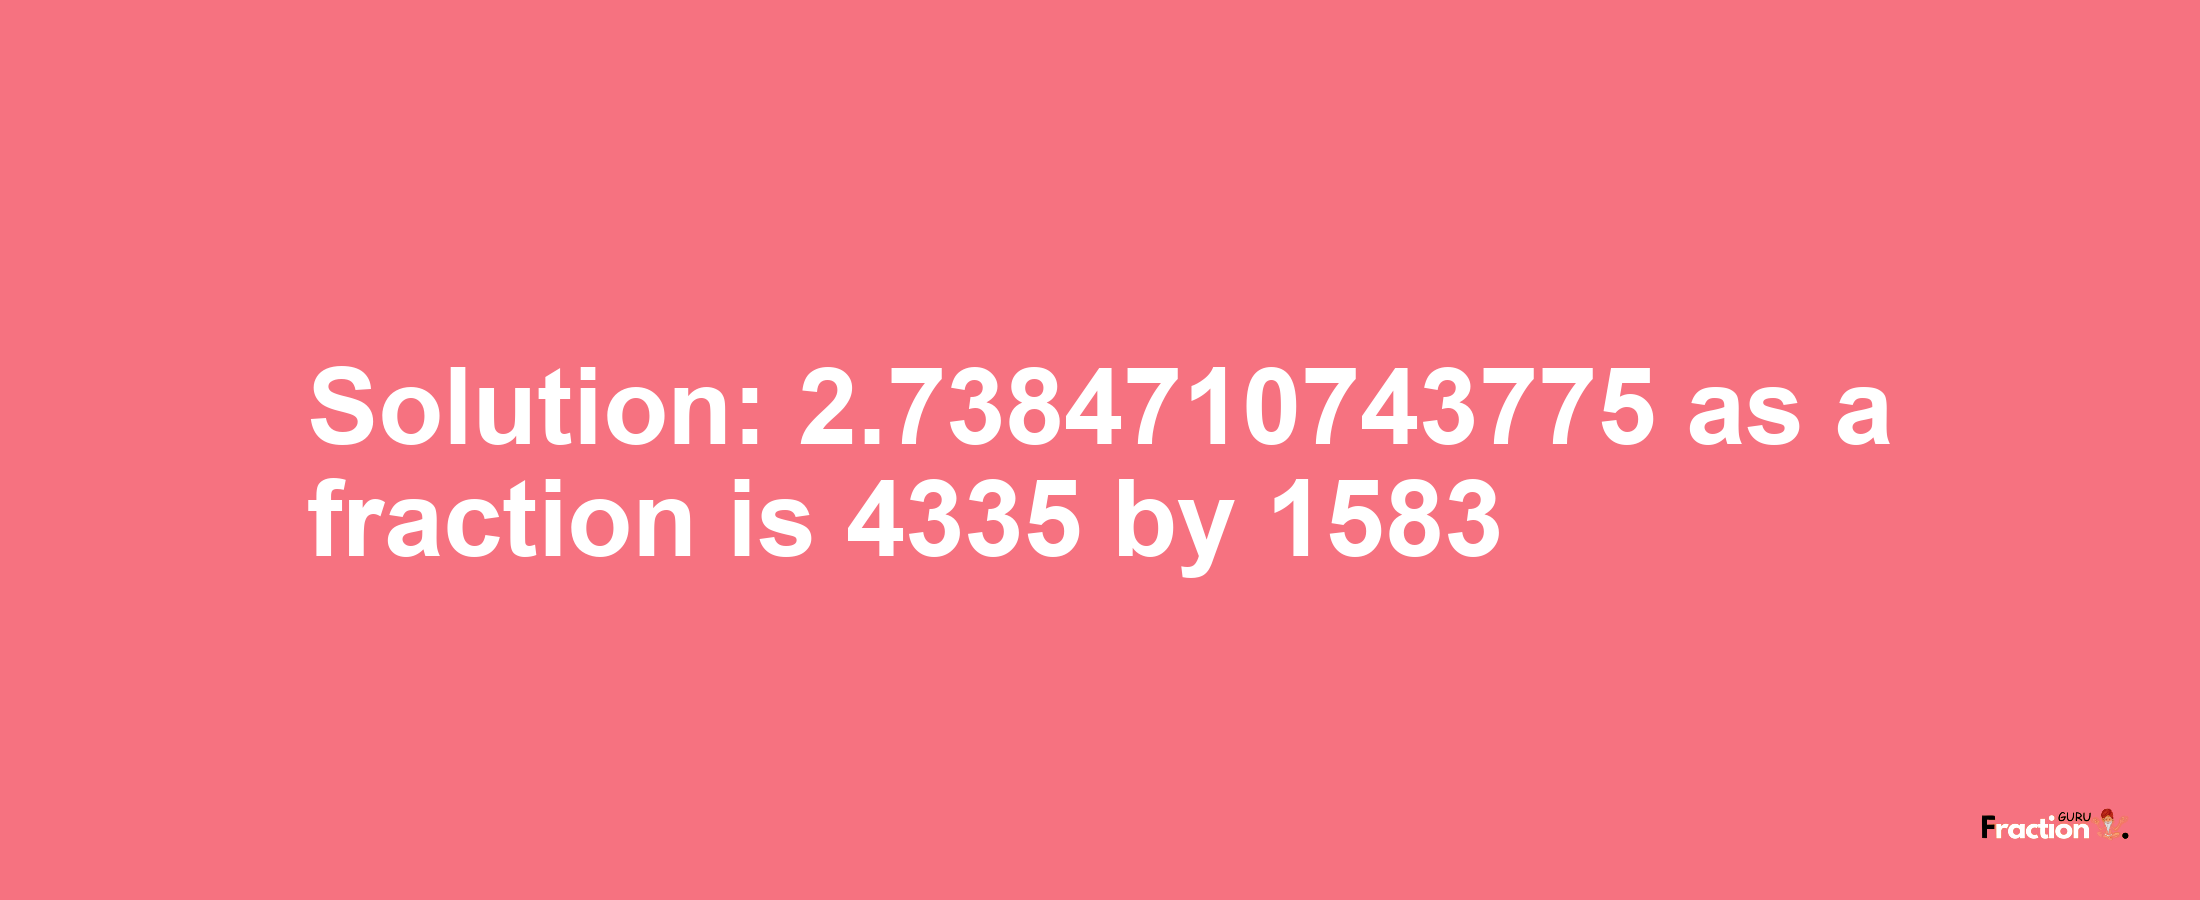 Solution:2.7384710743775 as a fraction is 4335/1583